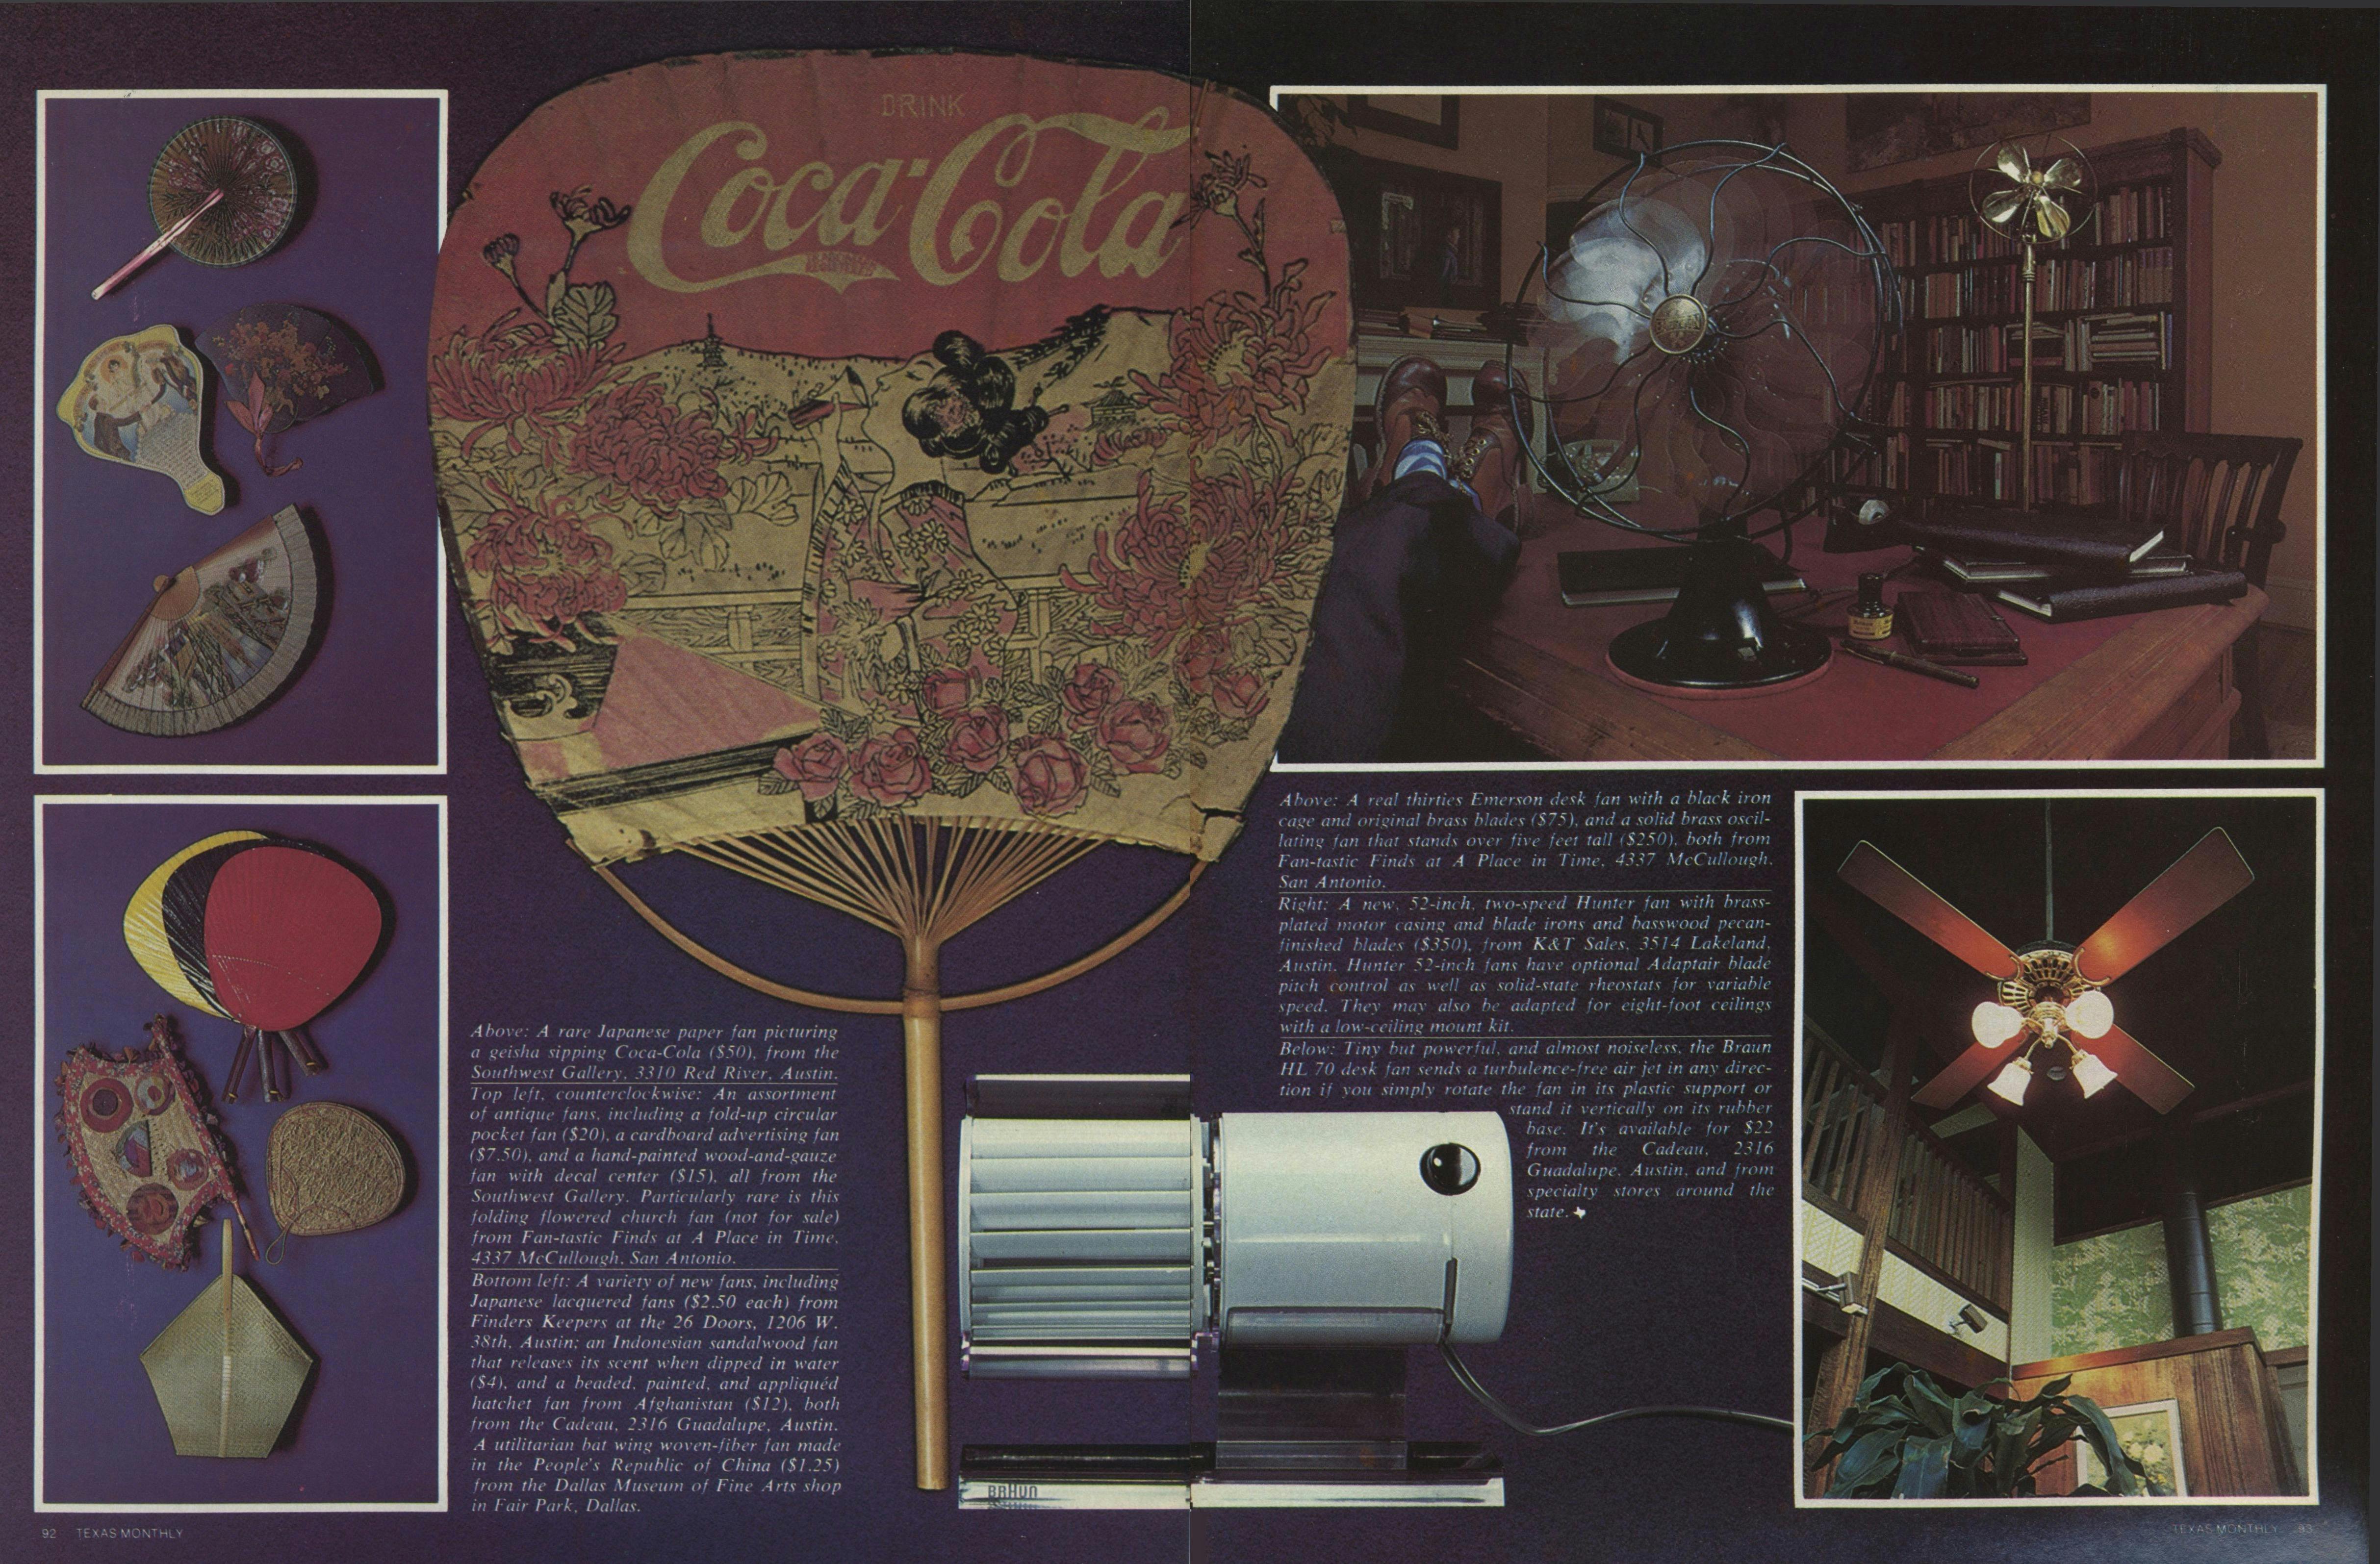 Top center: A rare Japanese paper fan picturing, a geisha sipping Coca-Cola ($50), from the Southwest Gallery, 3310 Red River, Austin. Top left, counterclockwise: An assortment of fans, including a fold-up circular pocket fan ($20), a cardboard advertising fan ($7.50), and a hand-painted wood-and-gauze fan with decal center ($.15), all from the Southwest Gallery. Particularly rare is the folding flowered church fan (not for sale) from Fan-tastic Finds at A Place in Time. 4337 McCullough, San Antonio. Bottom left: A variety of new fans, including Japanese lacquered fans ($2.50 each) from Finders Keepers at the 26 Doors, 1206 W. 38th, Austin; an Indonesian sandalwood fan that releases its scent when dipped in water ($4), and a beaded, painted, and appliqued hatchet fan from Afghanistan ($l2) both froth the Cadeau, 2316 Guadalupe, Austin. A utilitarian batwing woven-fiber fan made in the People’s Republic of China ($1.25) from the Dallas Museum of Fine Arts shop in Fair Park, Dallas. Top Right: A real thirties Emerson desk fan with a black iron case and original brass blades ($75), and a solid brass oscillating fan that stands over five feet tall ($250), both from Fan-tastic Finds at A Place in Time, San Antonio.  Below Right: A new 52-inch, two-speed Hunter fan with brass-plated motor casing and blade irons and basswood pecan-finished blades ($350) from K & T Sales, 3514 Lakeland, Austin. Hunter 52-inch fans have optional Adaptair blade pitch control as well as solid-state rheostats for variable speed. They may also be adapted for eight-foot ceilings with a low-ceiling mount kit. Below Center: Tiny but powerful, and almost noiseless, the Braun HL70 desk fan sends a turbulence-free air jet in any direction if you simply rotate the fan in its plastic support of stand it vertically on its rubber base. It's available for $22 from the Cadeau, 2316 Guadalupe, Austin, and from specialty stores around the state. 